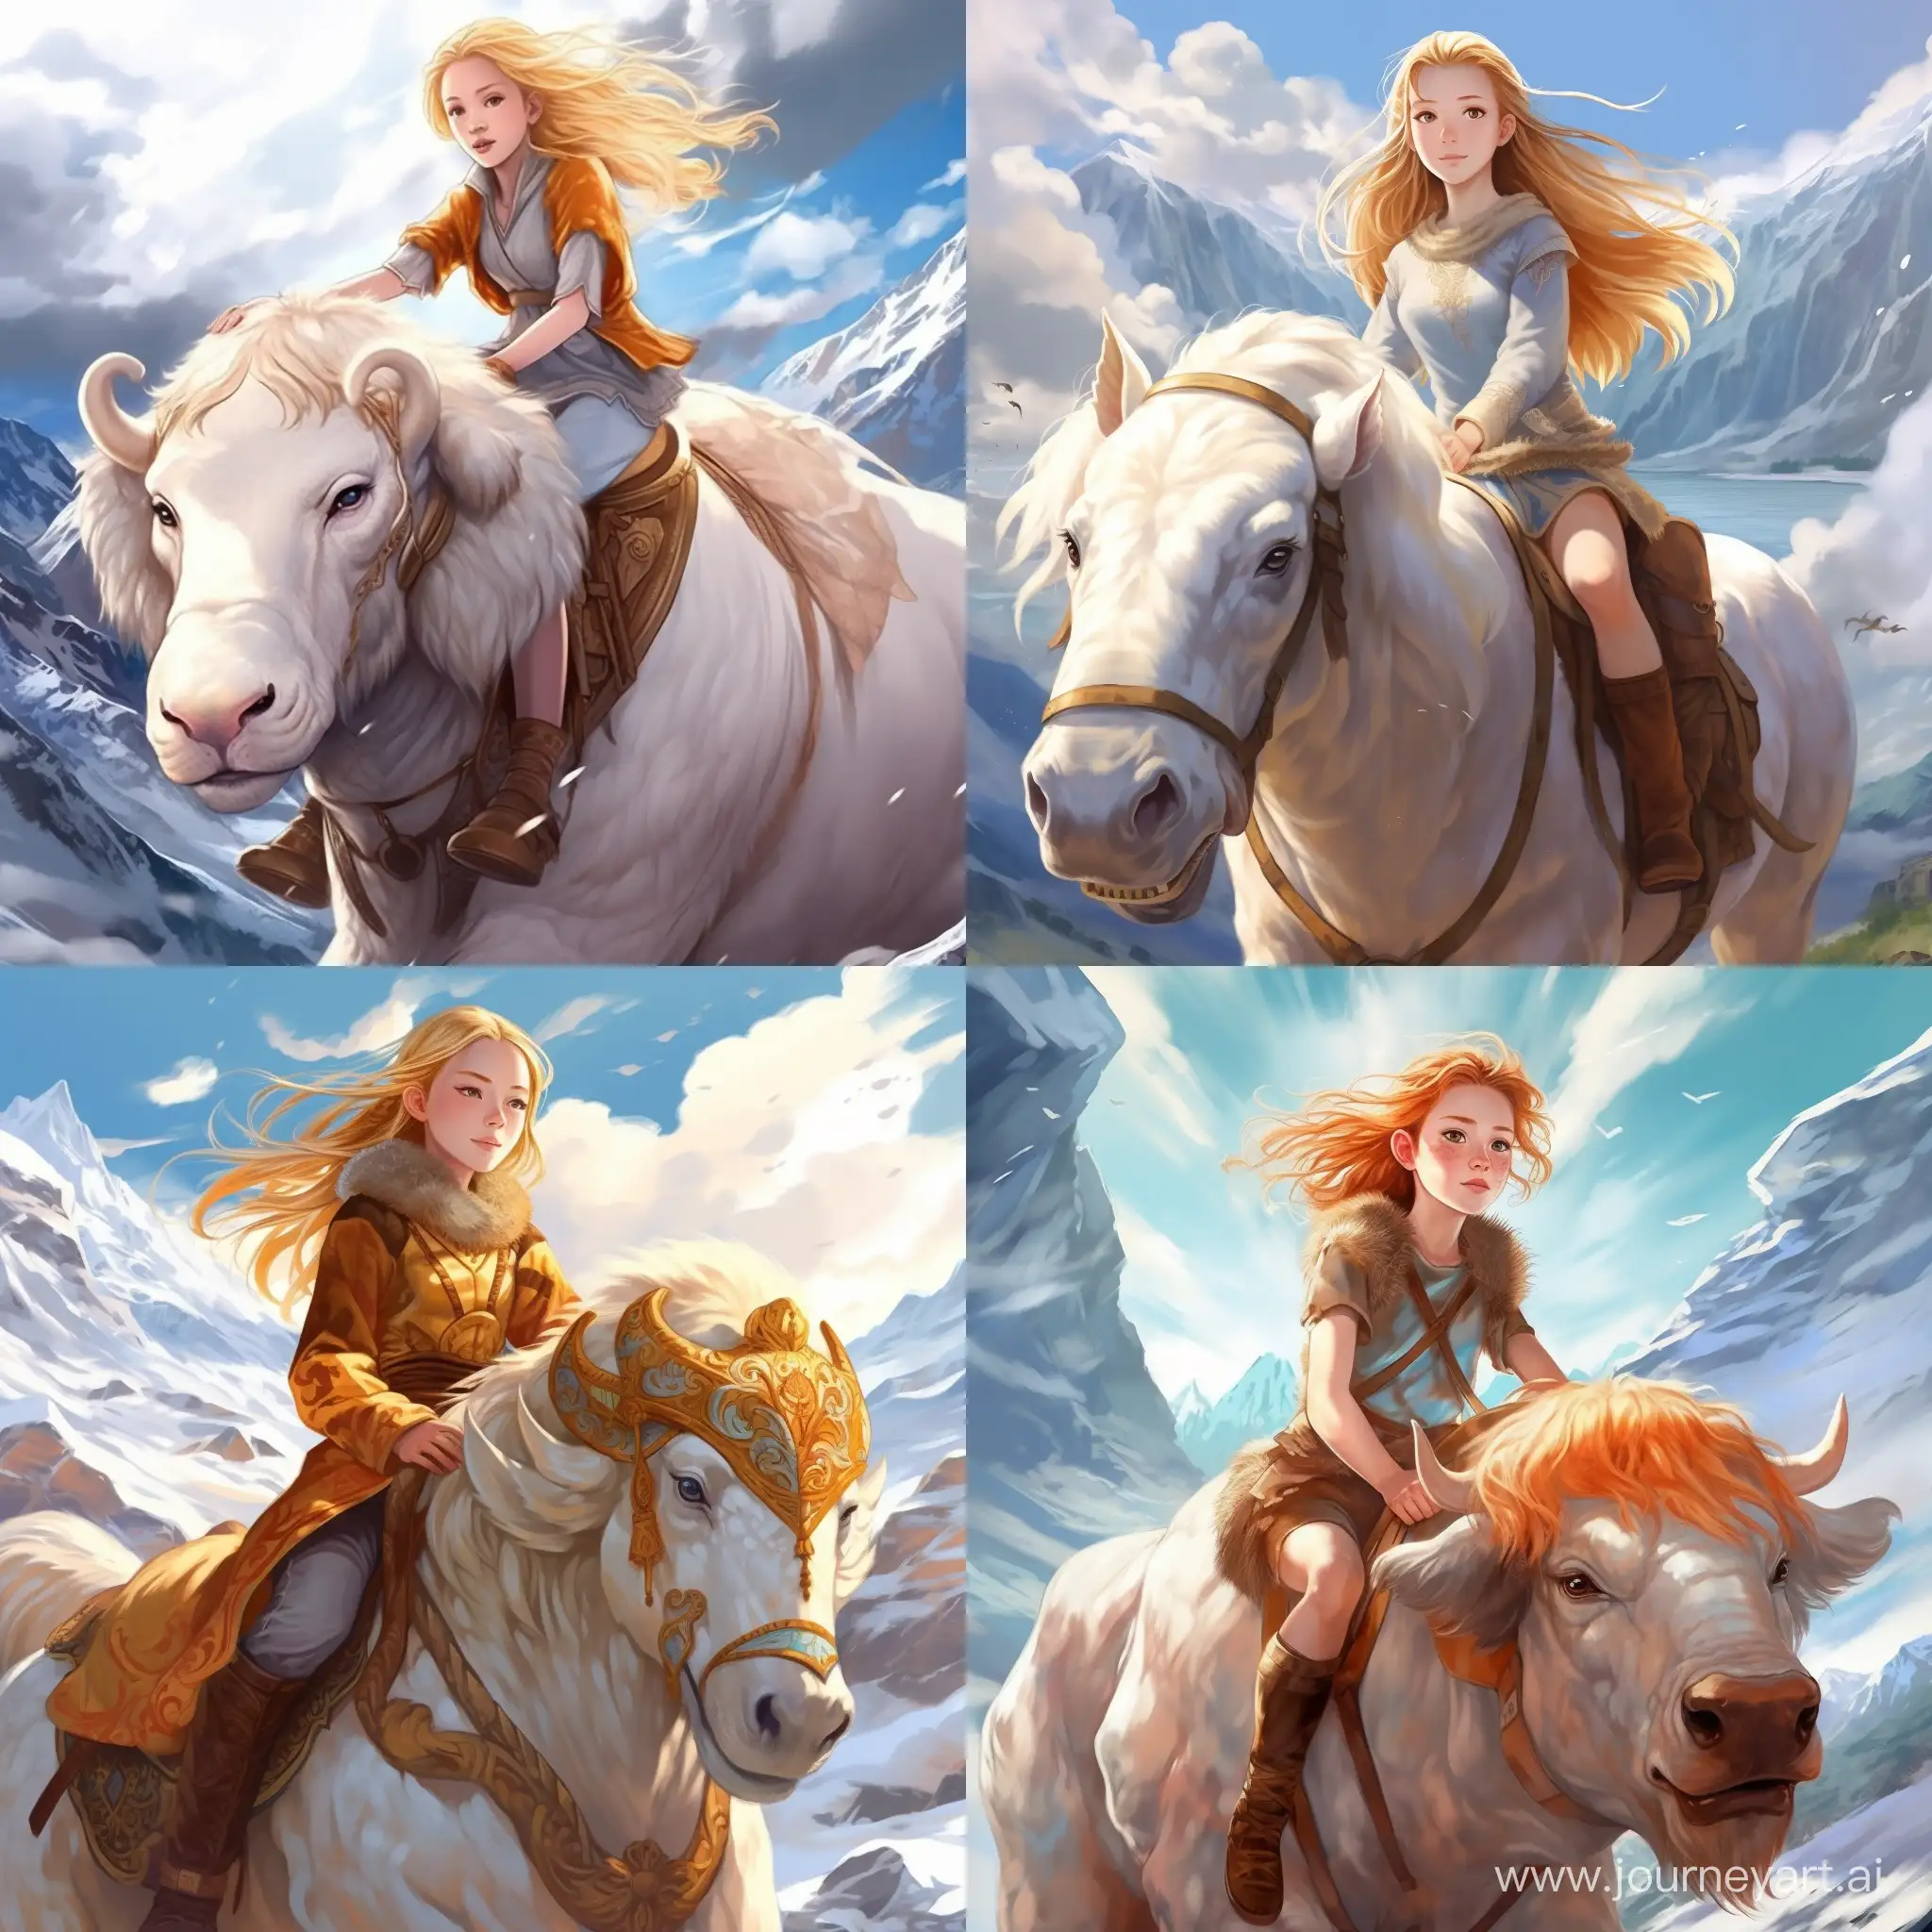 Teenage-Girl-Riding-Appa-in-Avatar-Style-Through-Cloudy-Skies